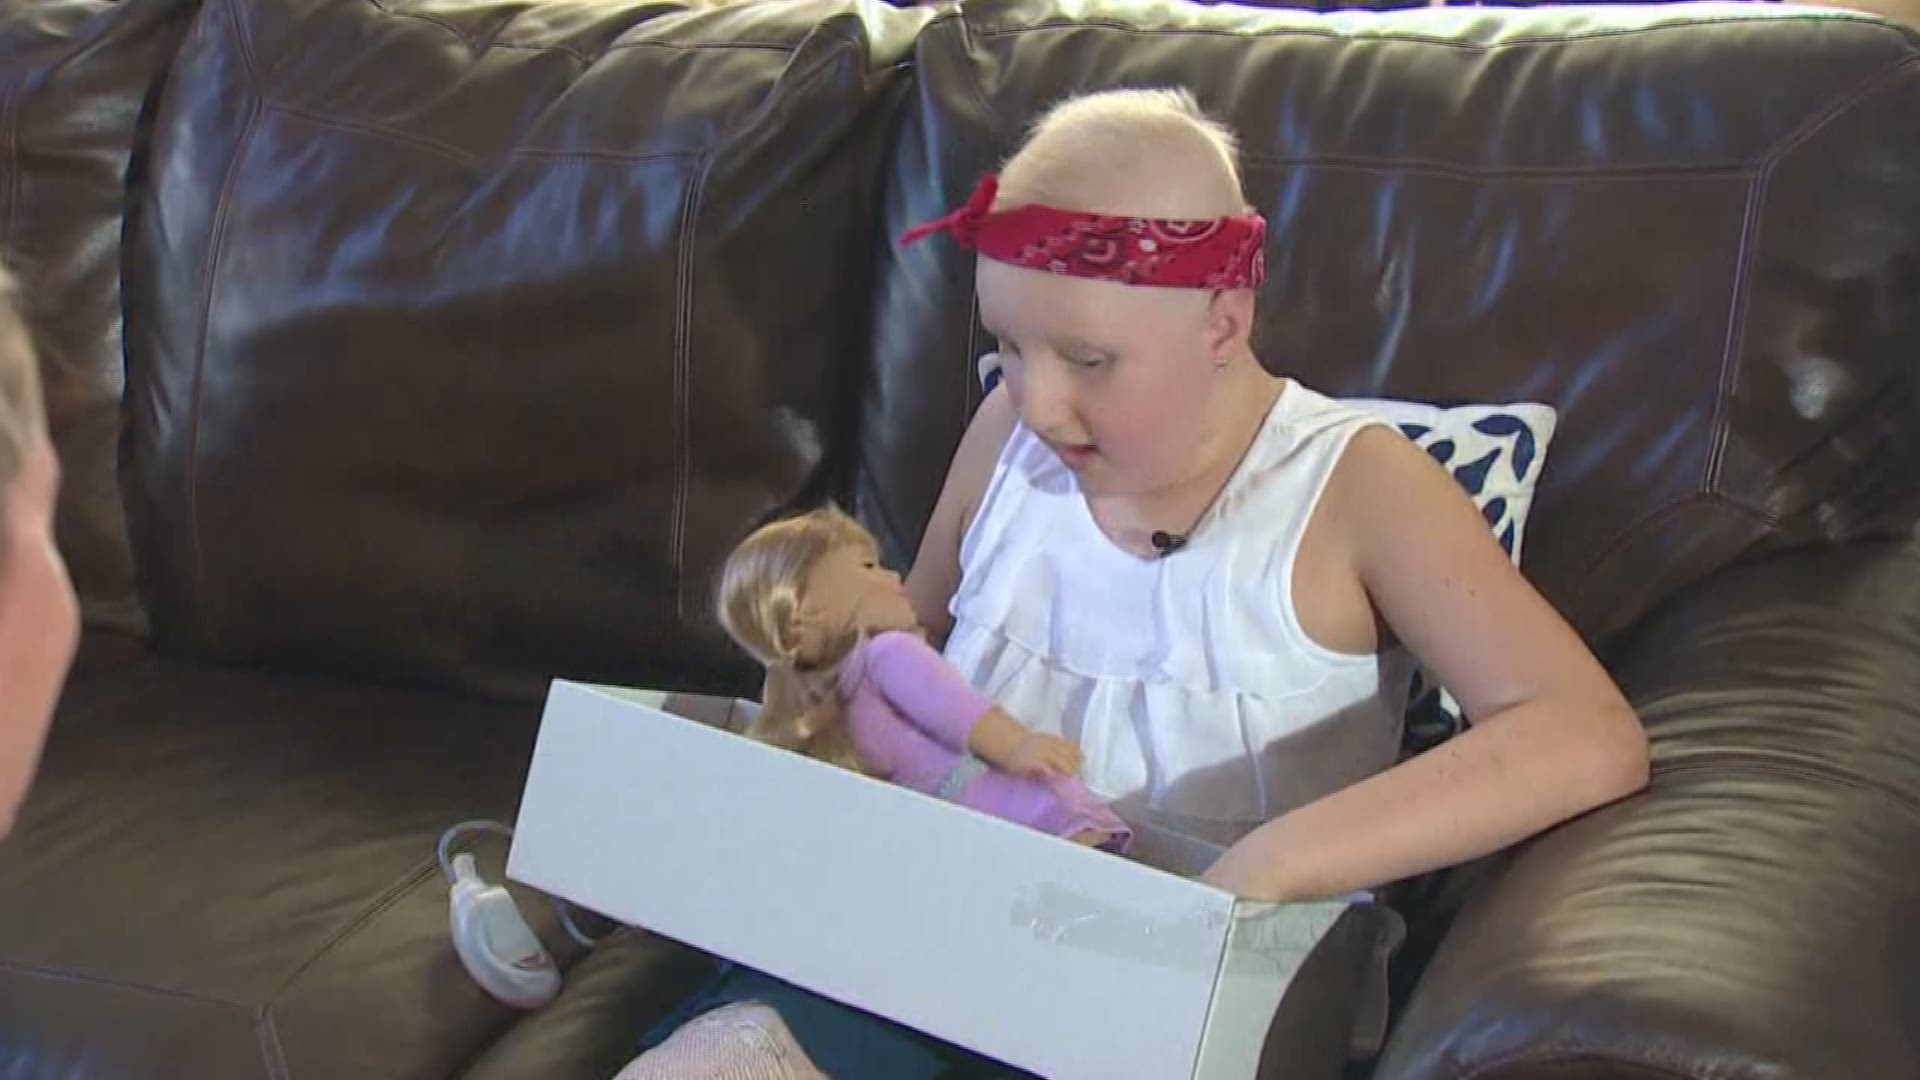 A local girl diagnosed with a rare form of cancer was surprised with a doll that has a prosthetic leg -- just like her.